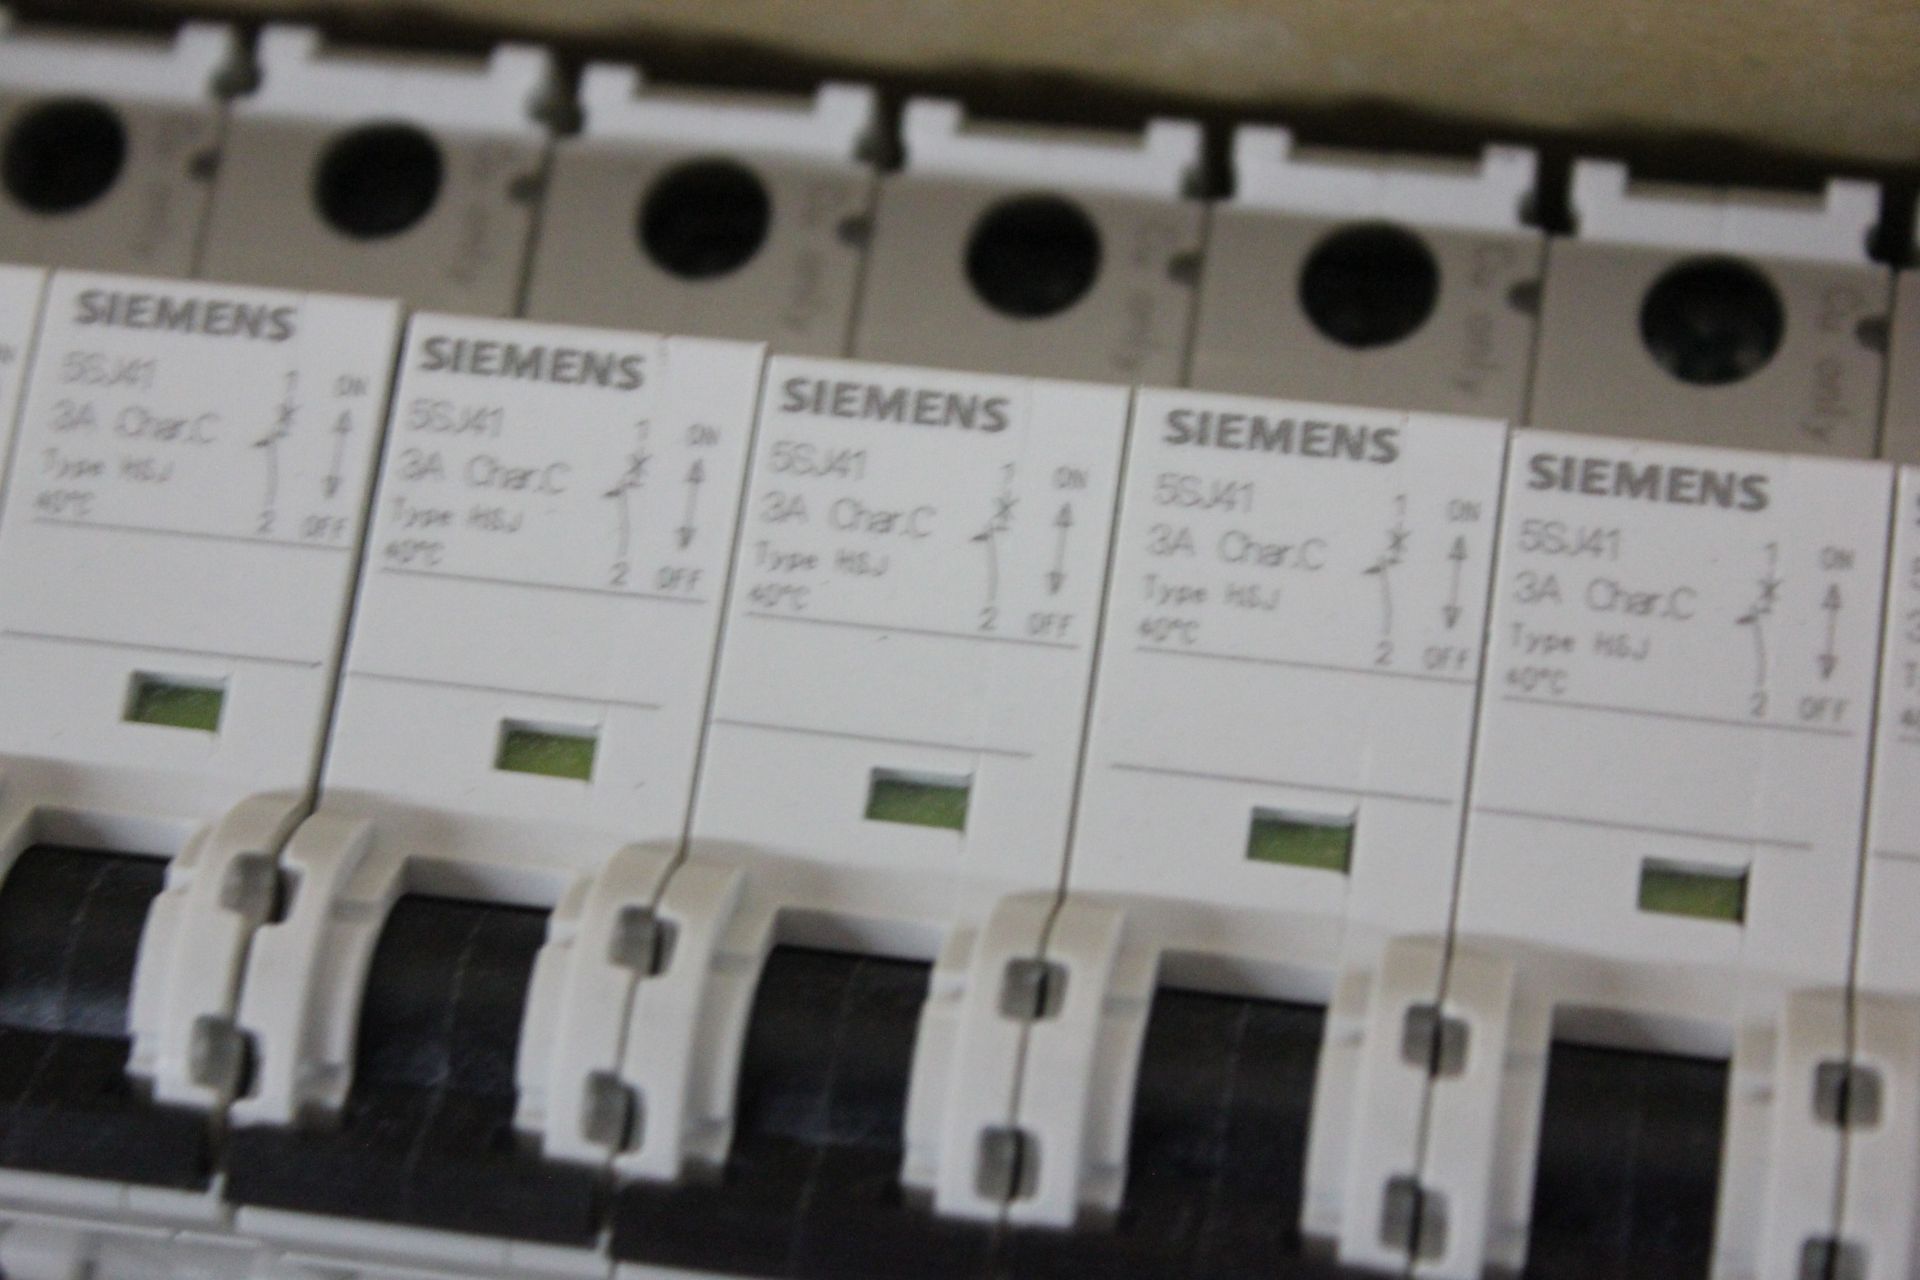 LOT OF NEW SIEMENS 3A 1P CIRCUIT BREAKERS - Image 4 of 4